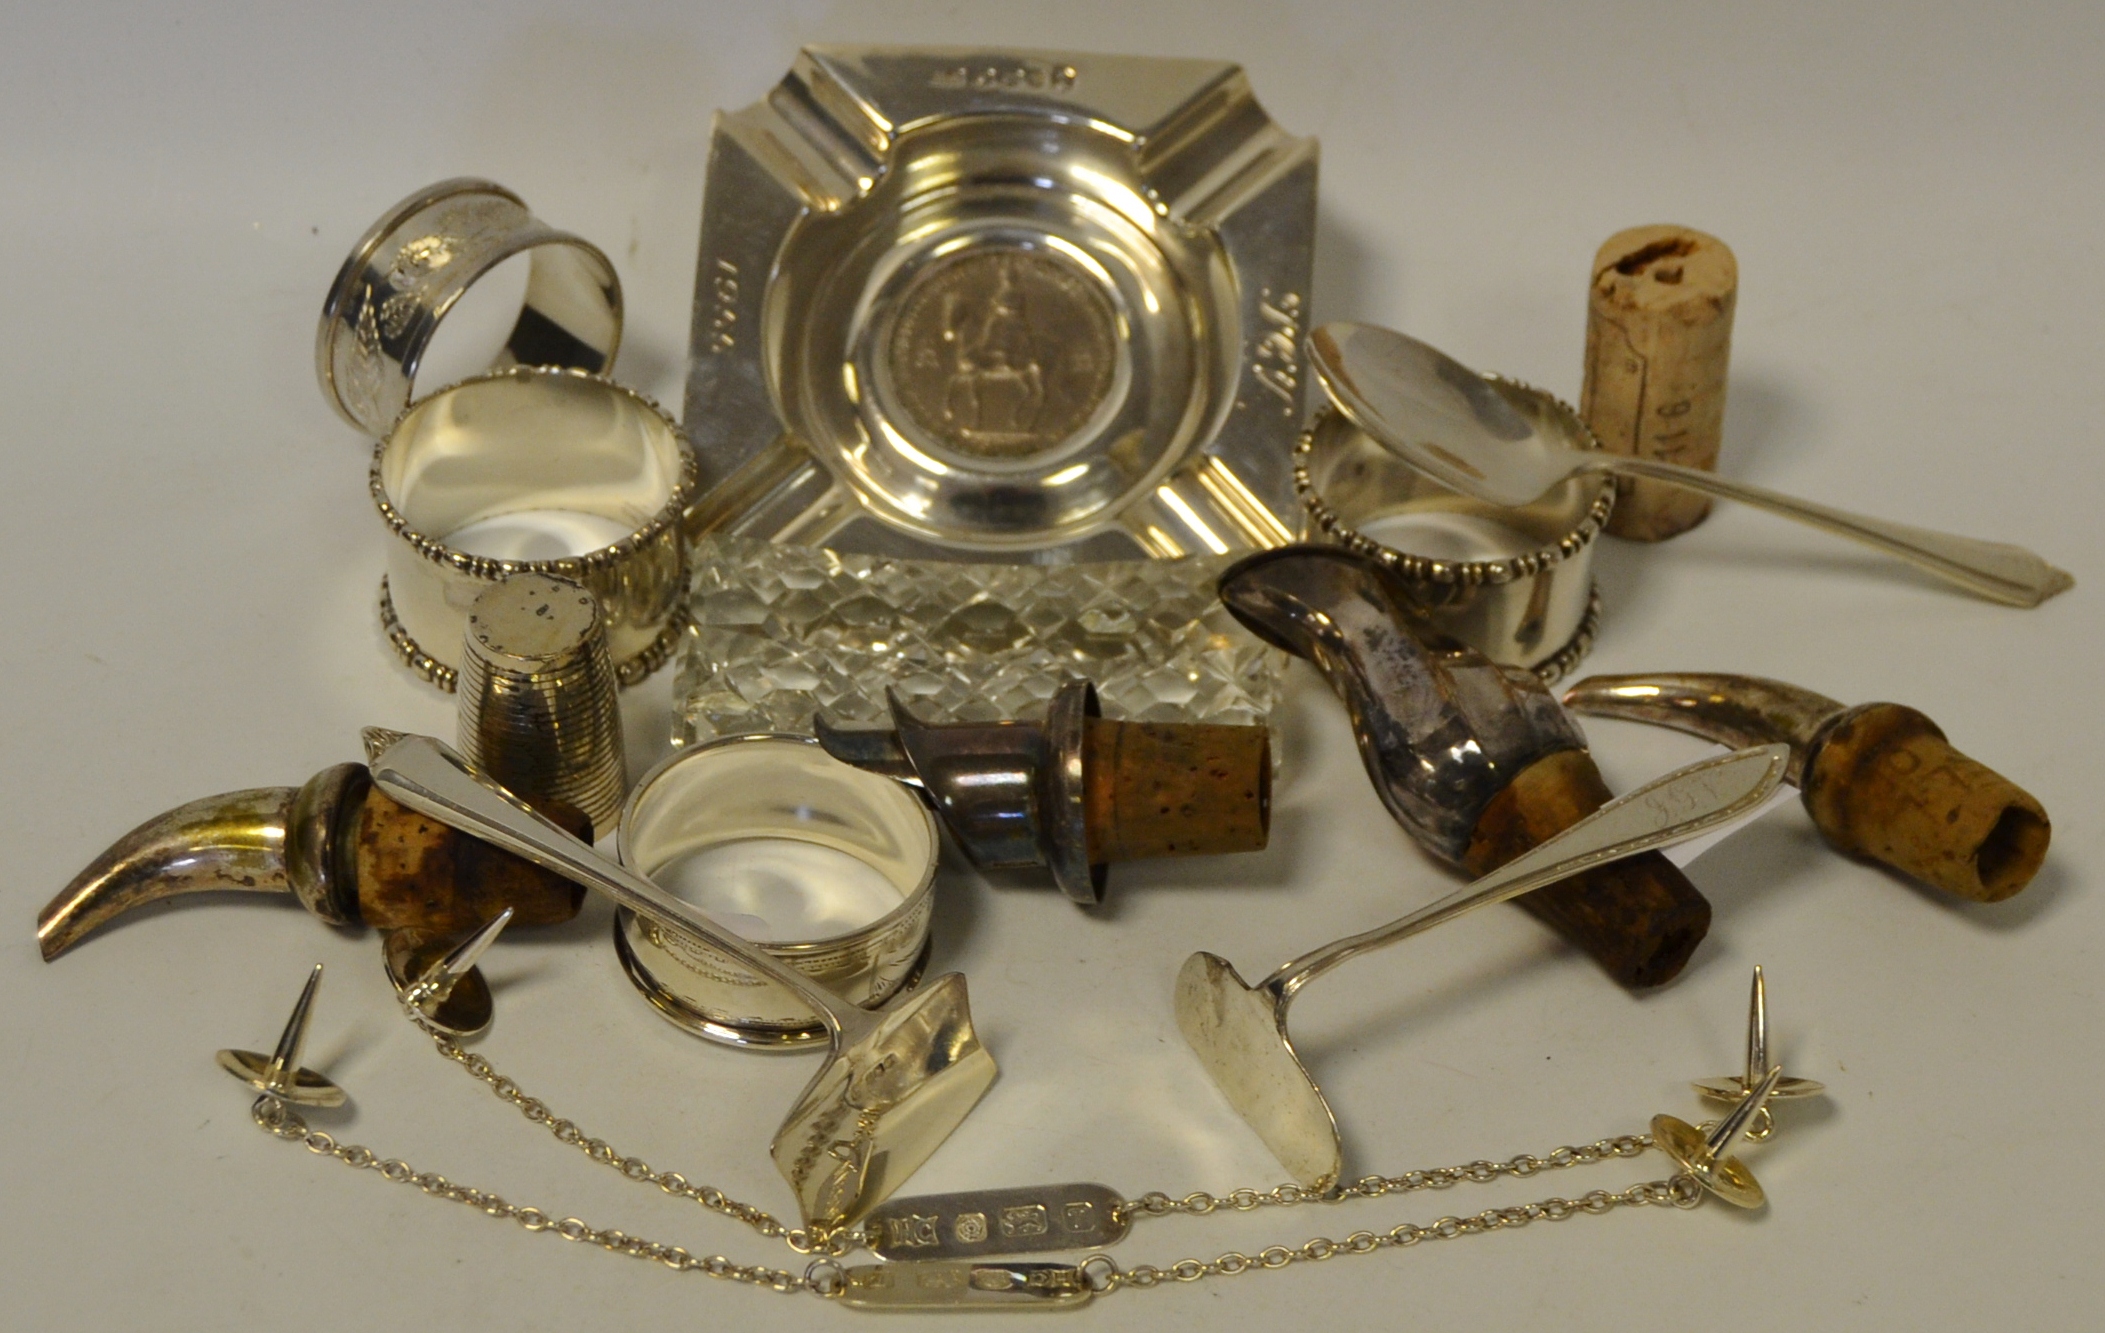 A silver ashtray inset with a 5 shilling,